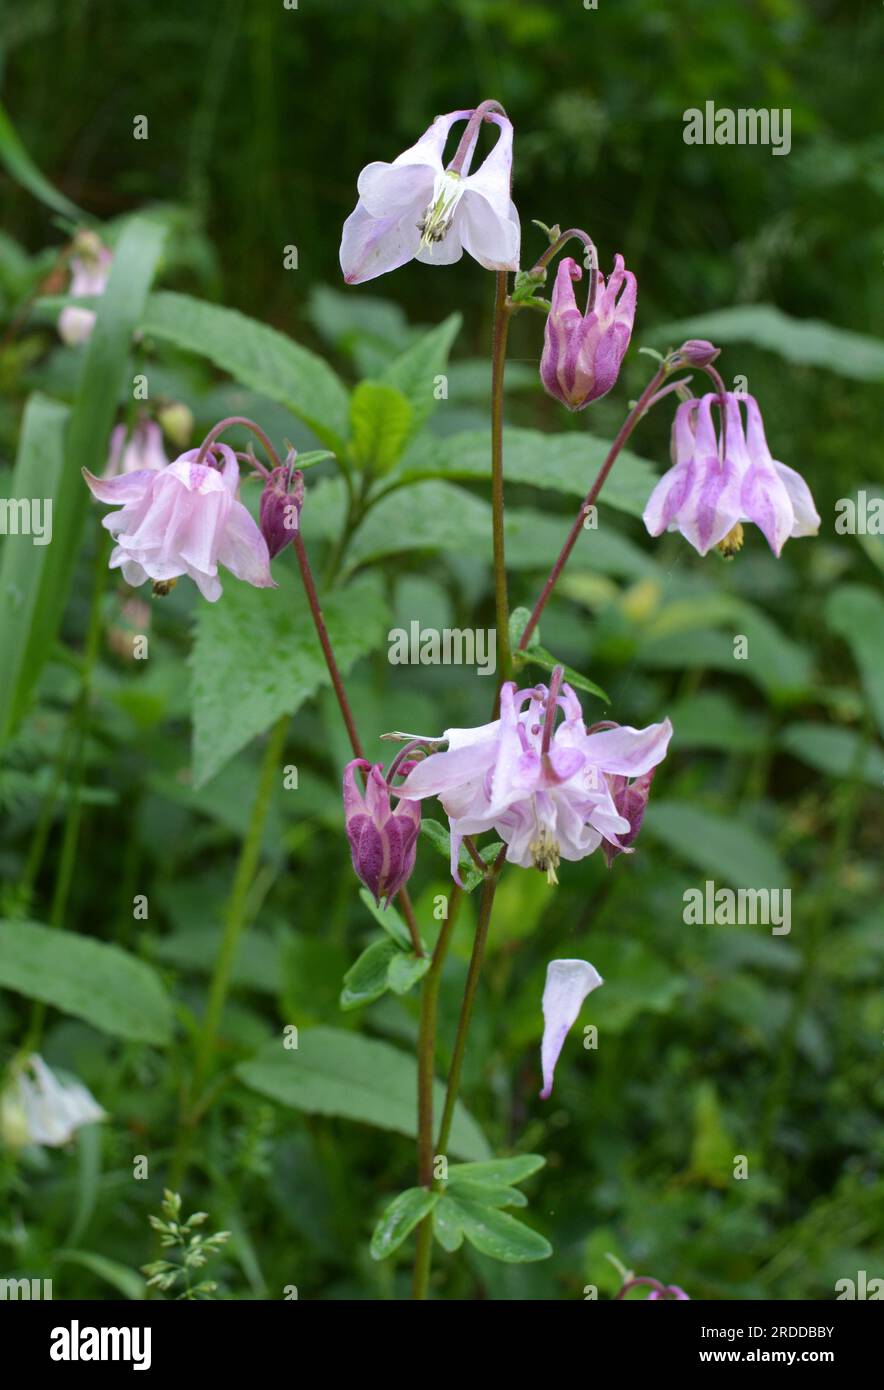 In late spring and early summer, Aquilegia vulgaris blooms in nature in the garden Stock Photo